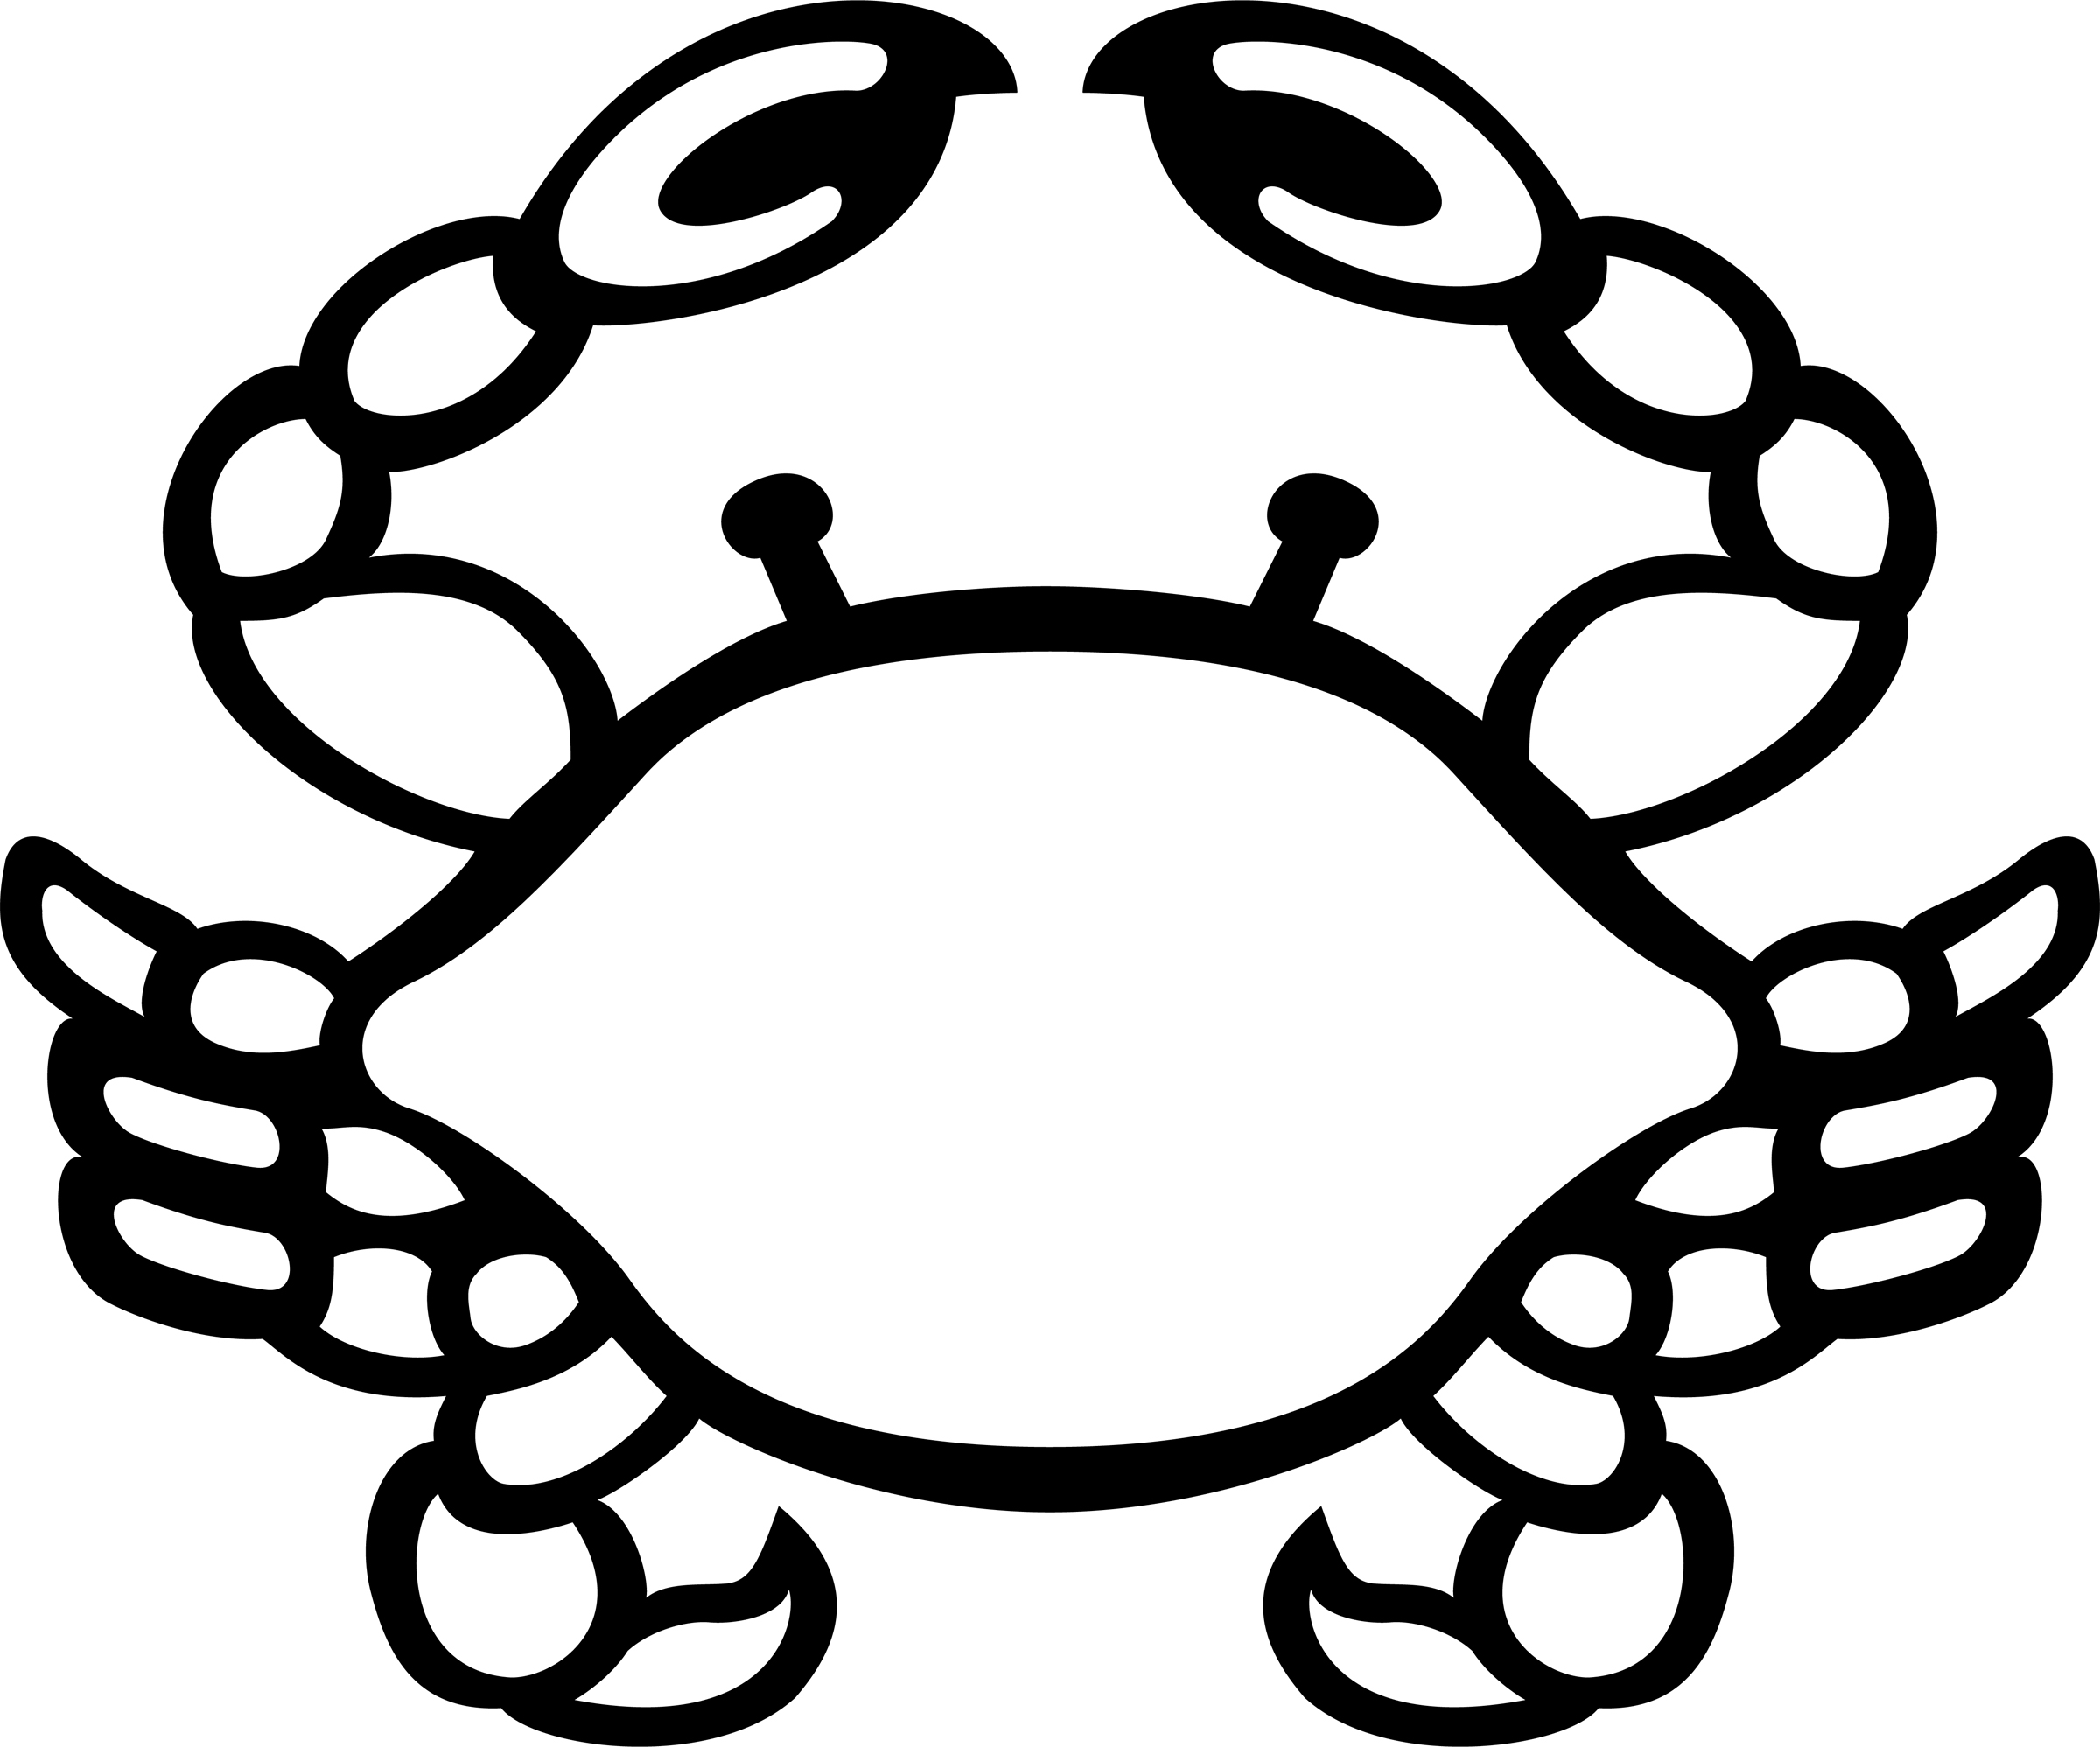 Blue Crab Clip Art From Votes